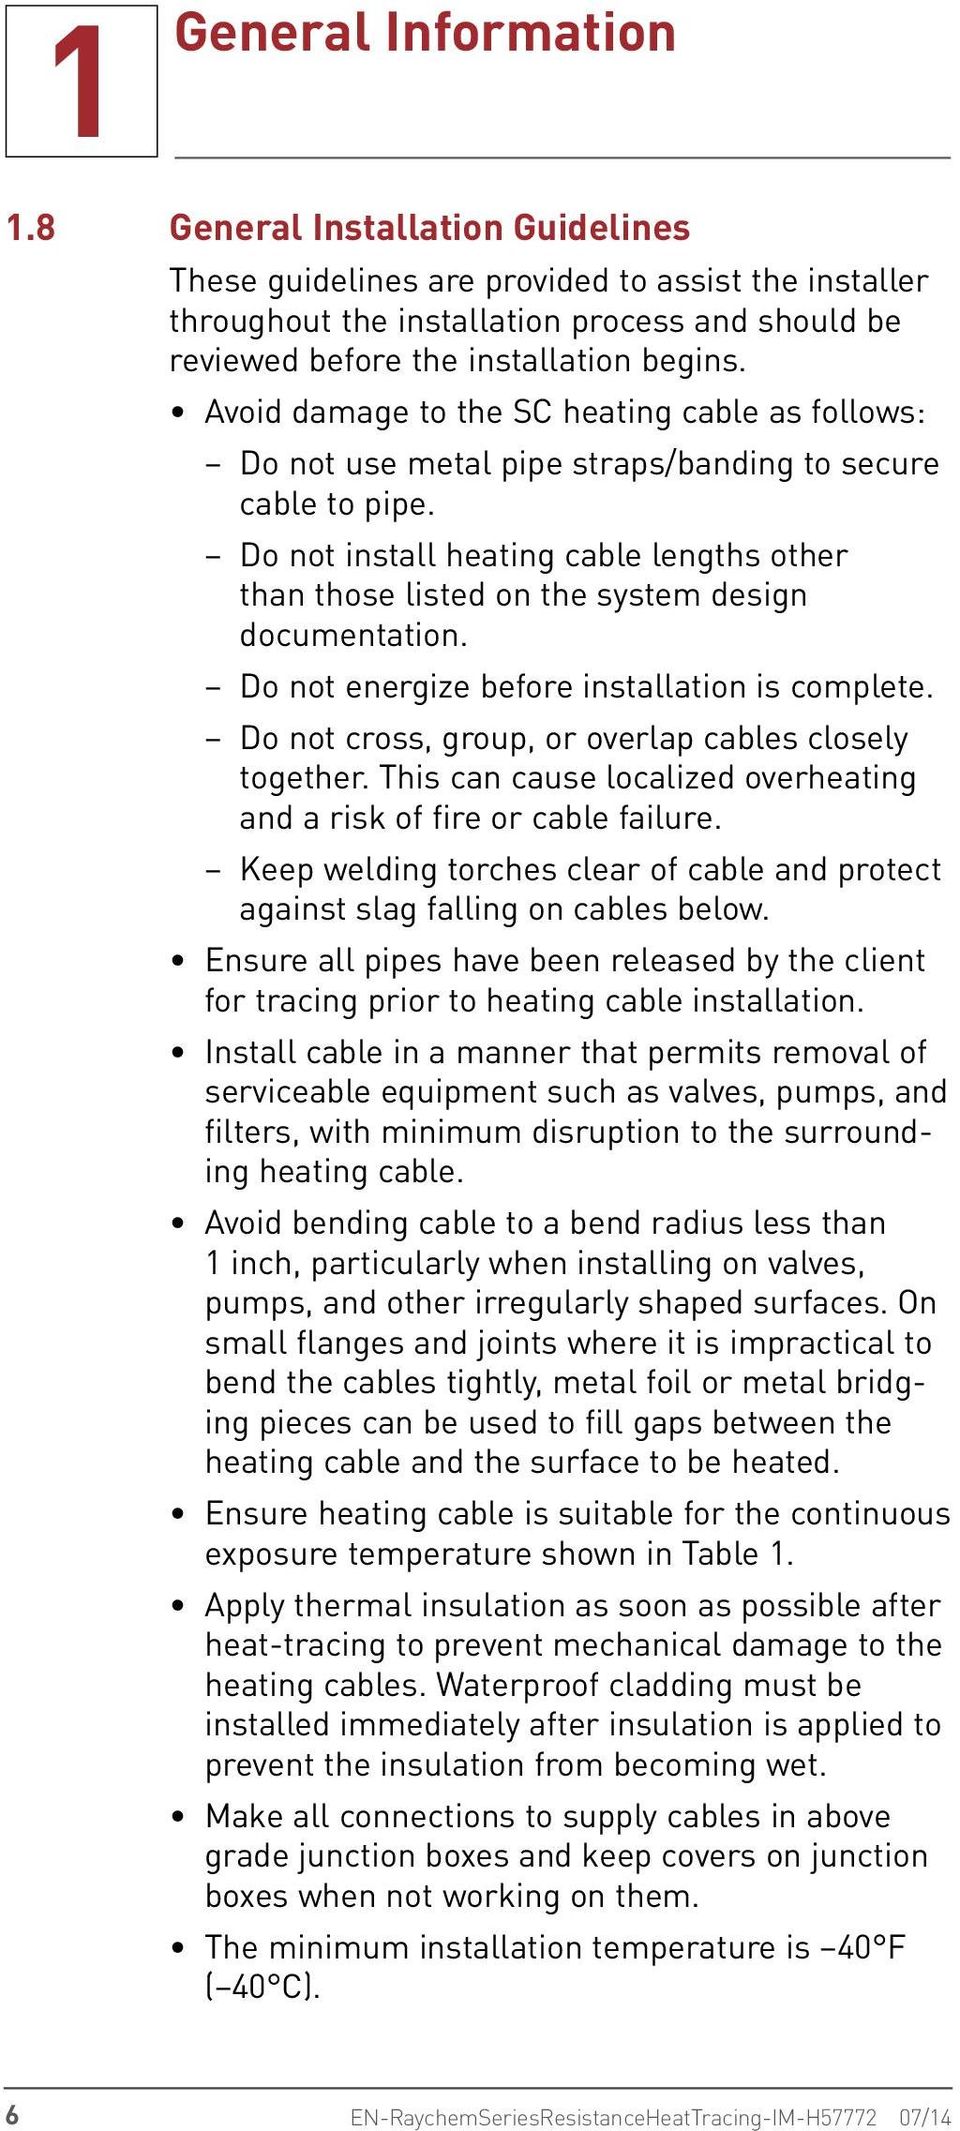 Avoid damage to the SC heating cable as follows: Do not use metal pipe straps/banding to secure cable to pipe.